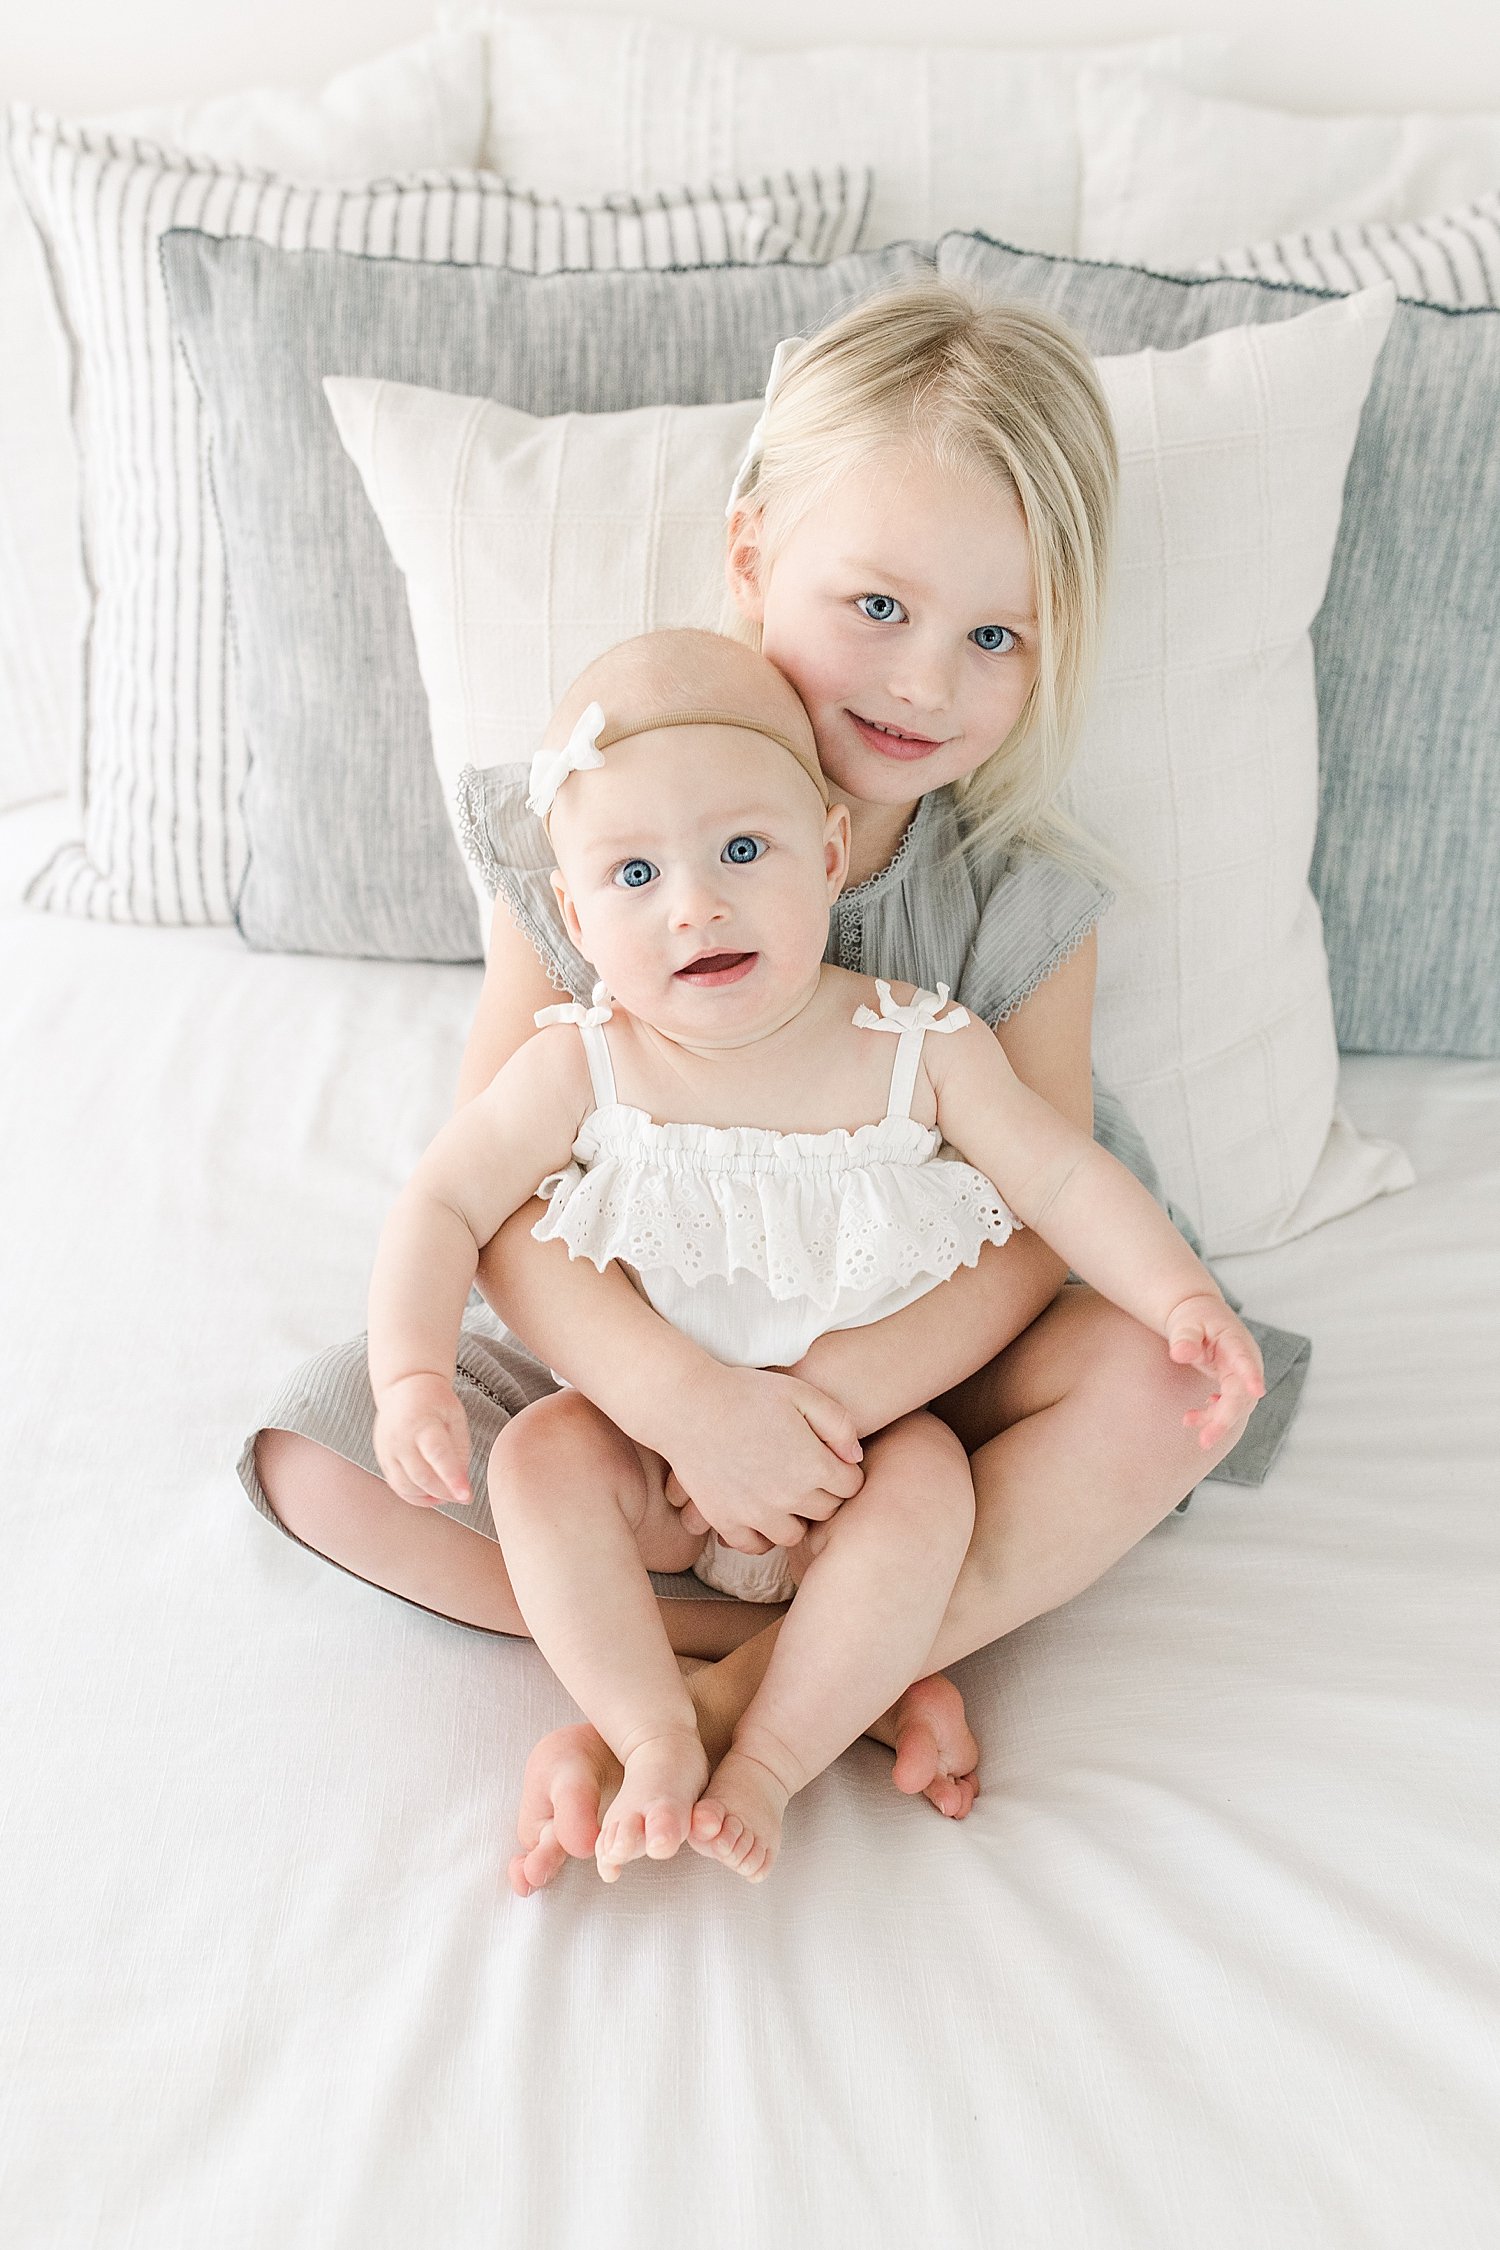 Big sister holding her baby sister | Kristin Wood Photography